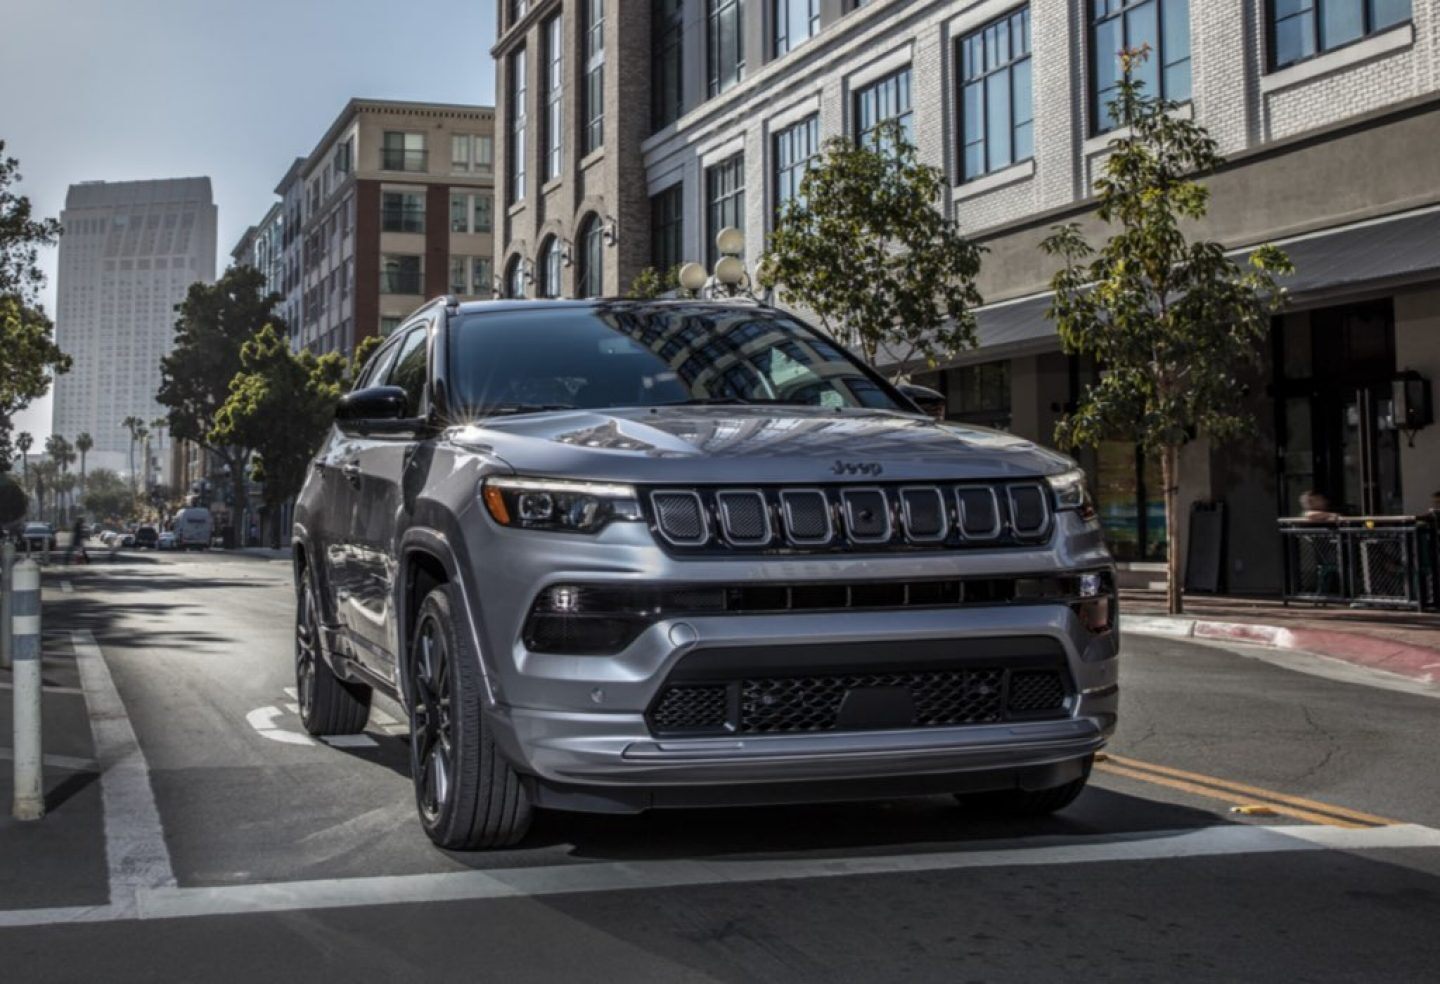 The New 2022 Jeep® Compass with an Evolved Jeep Design